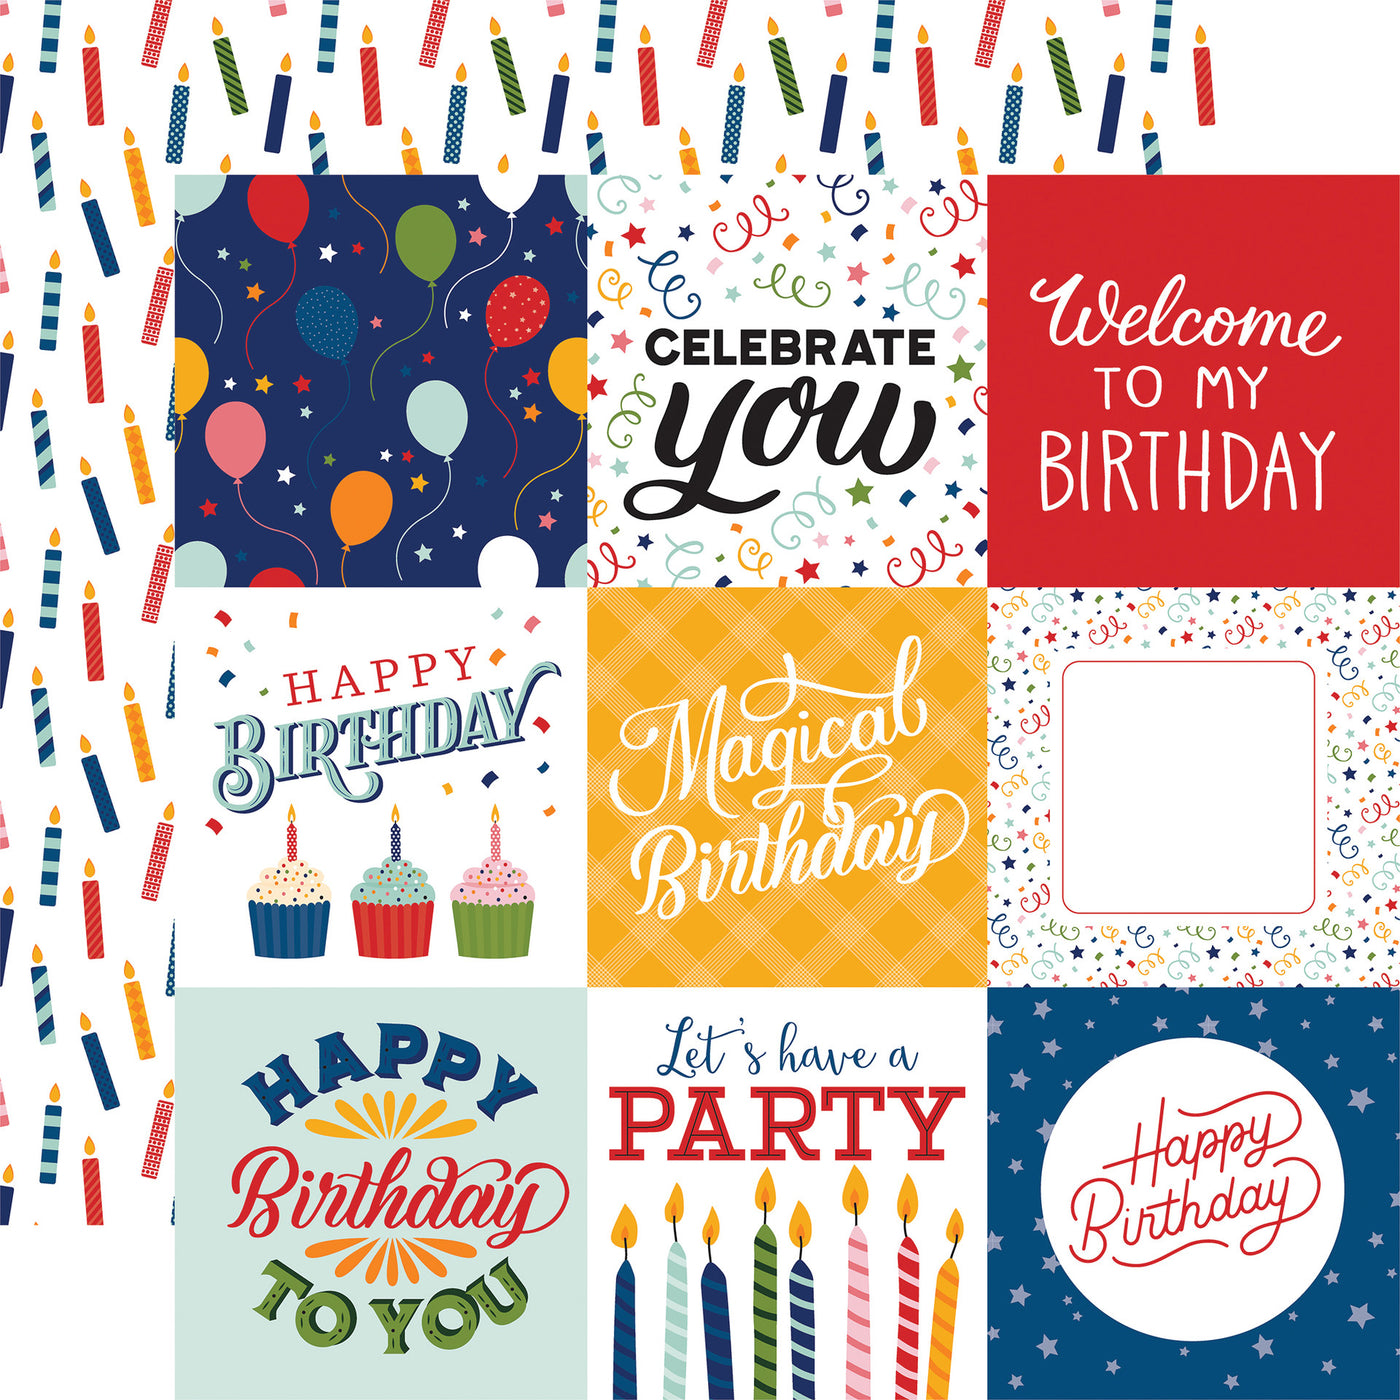 12x12 double-sided multi-colored patterned paper from Echo Park Paper (colorful birthday phrases, multi-colored birthday candles on a white background reverse).